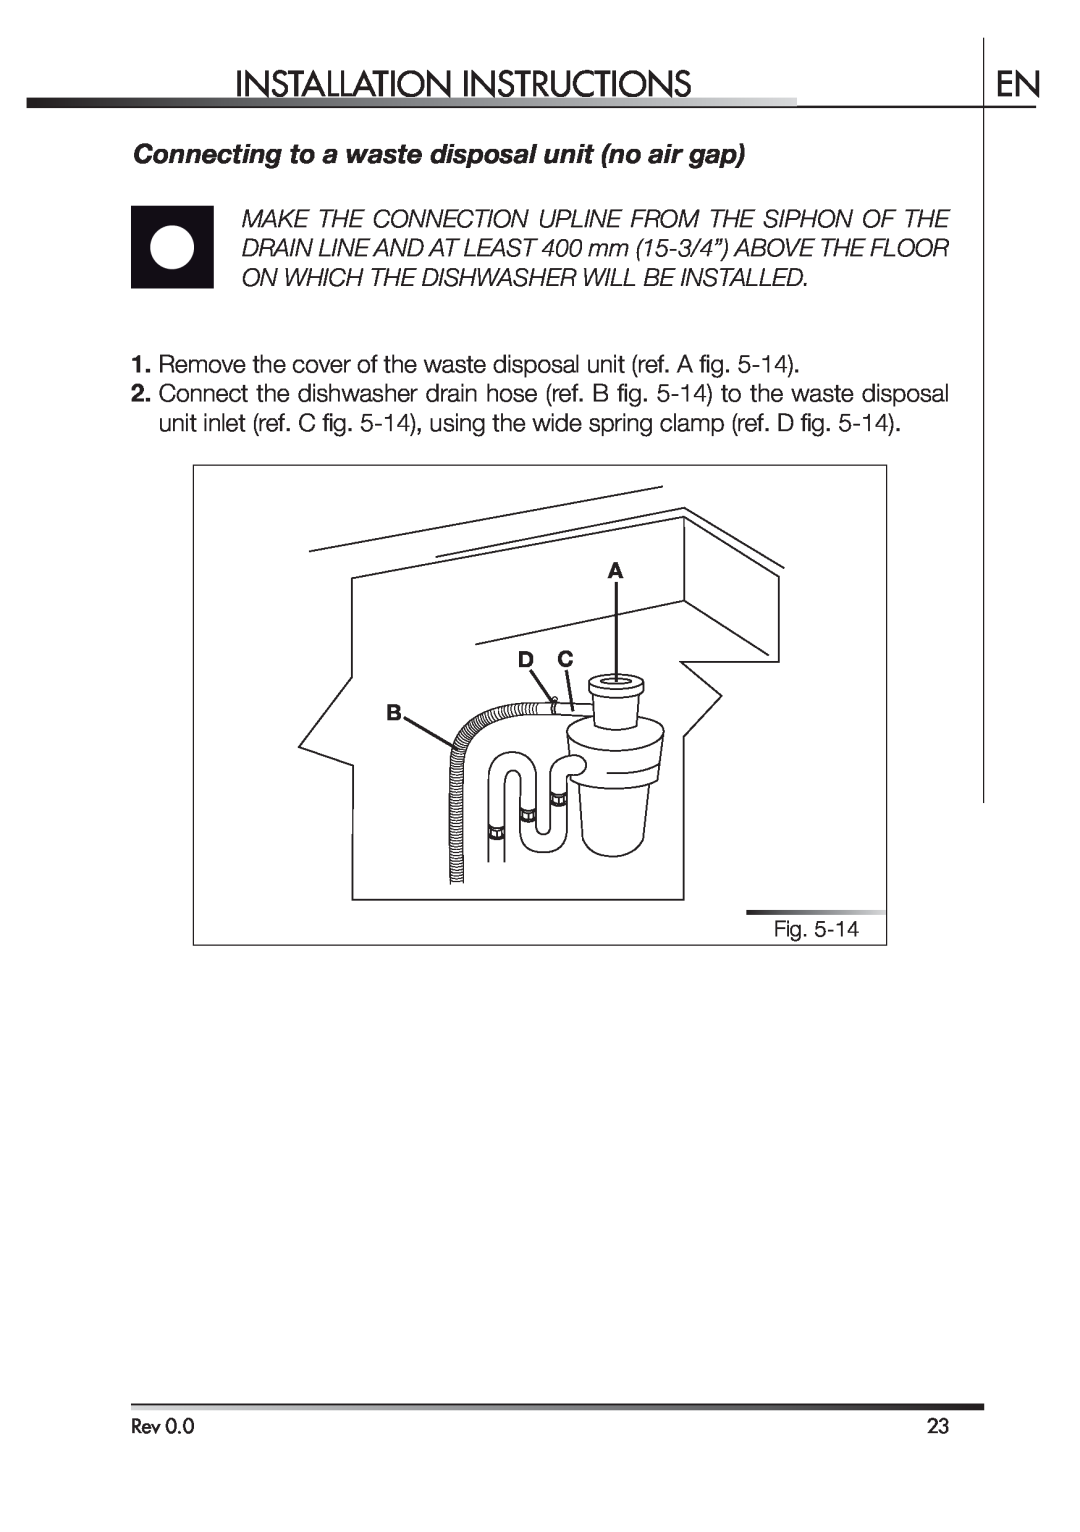 Smeg STA4645 instruction manual Connecting to a waste disposal unit no air gap, Installation Instructions, A D C B 